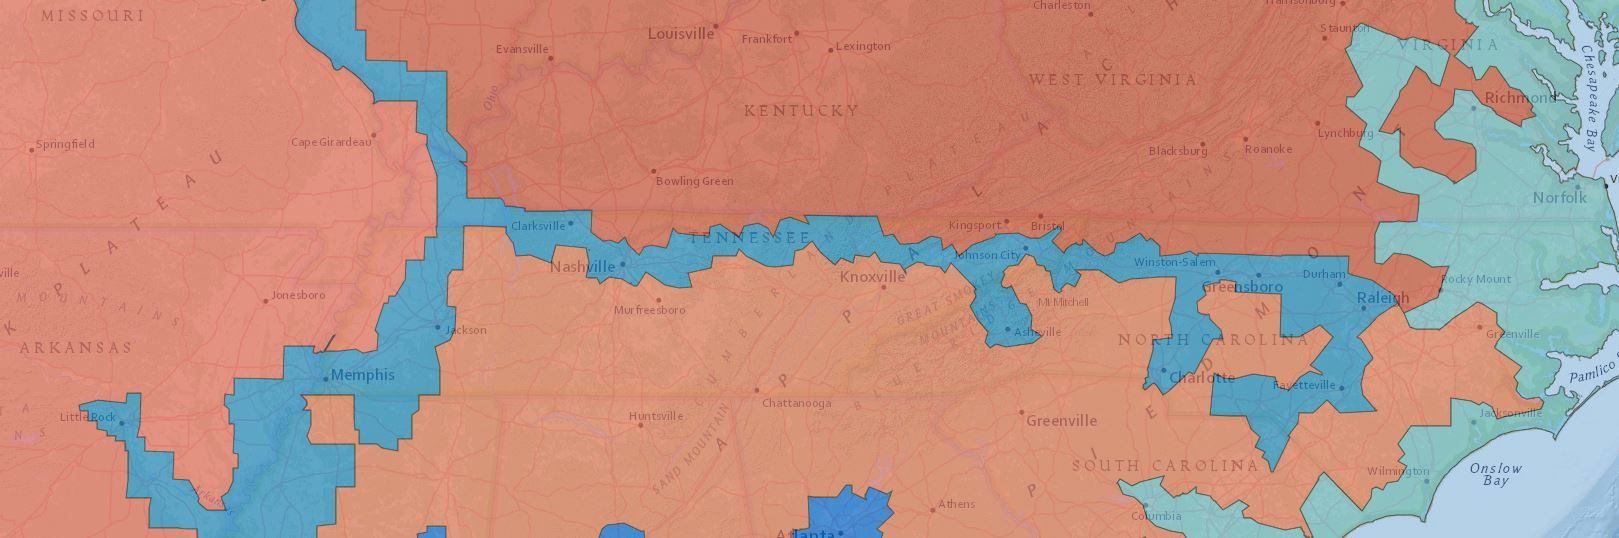 A Nationwide Gerrymandering Thought Experiment